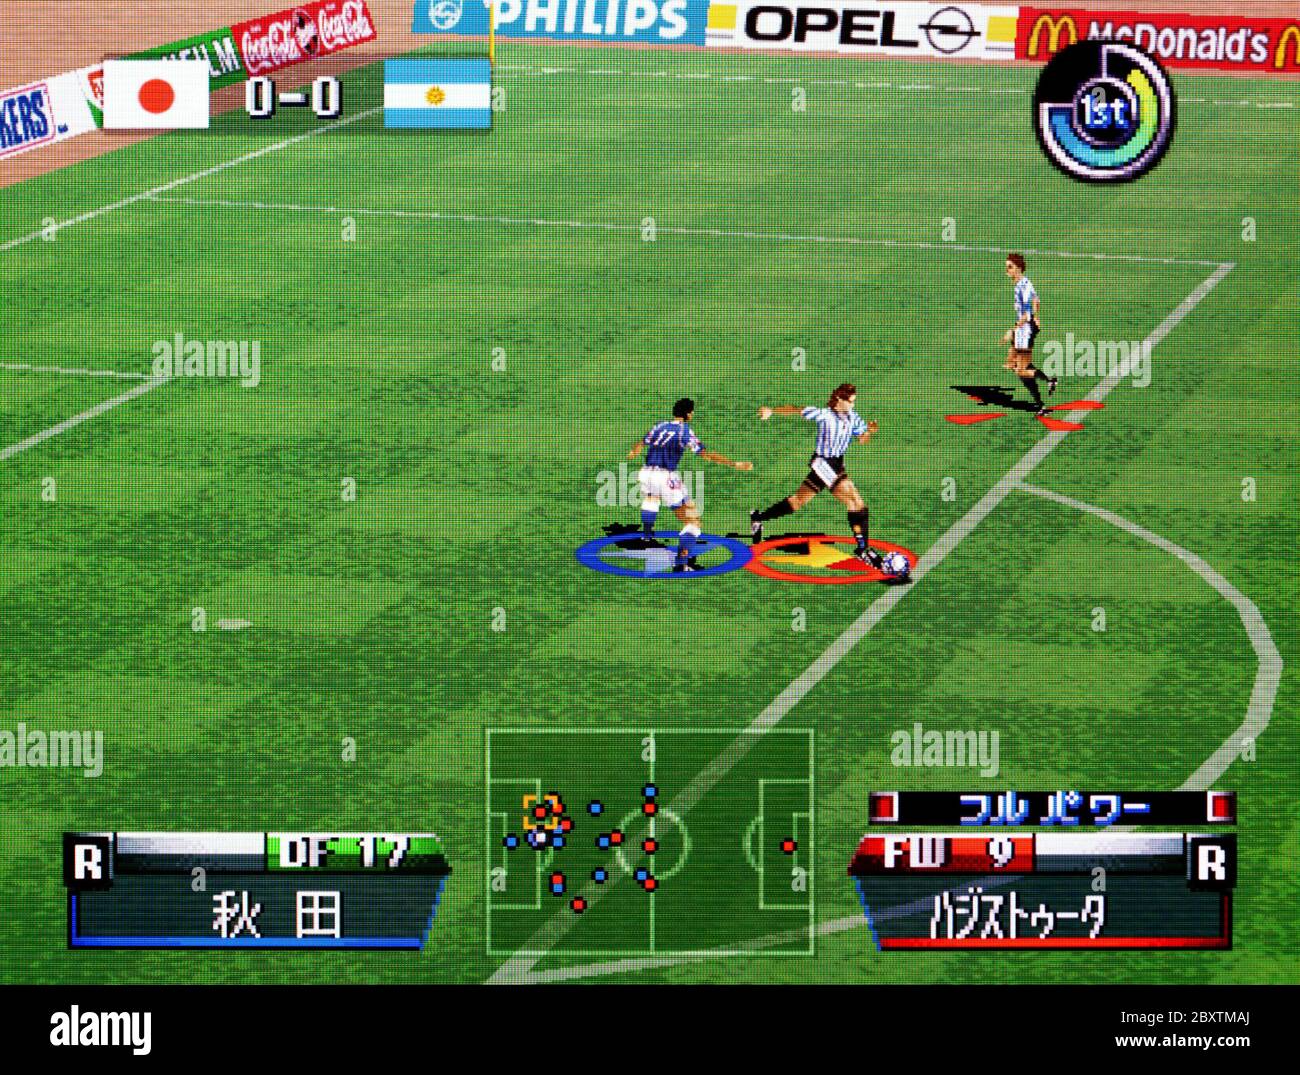 Jikkyou World Soccer World Cup France '98 - Nintendo 64 Videogame -  Editorial use only Stock Photo - Alamy